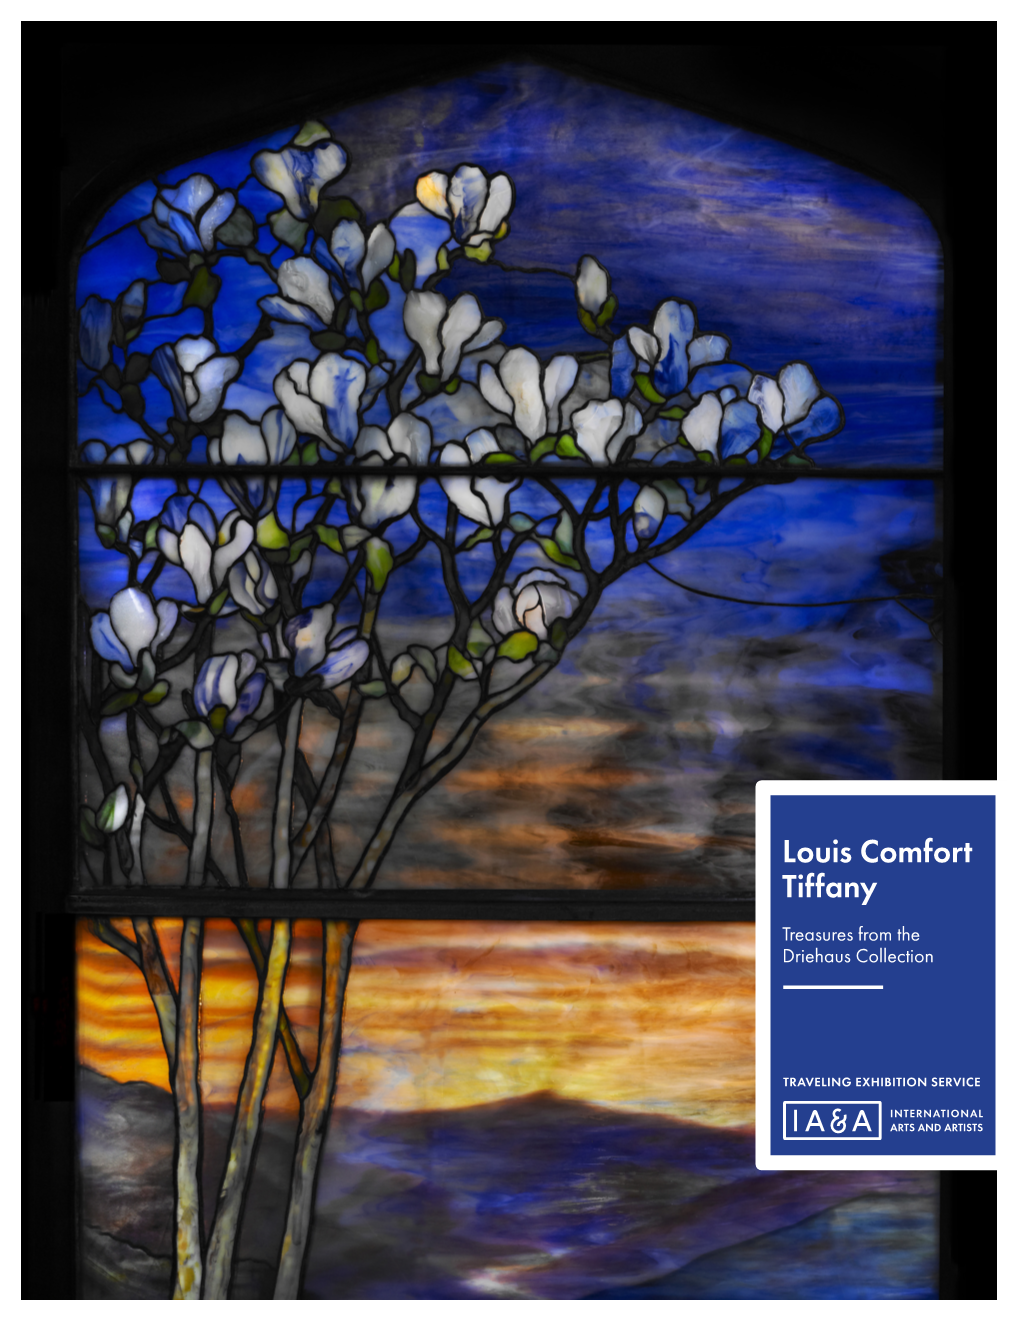 Louis Comfort Tiffany Treasures from the Driehaus Collection